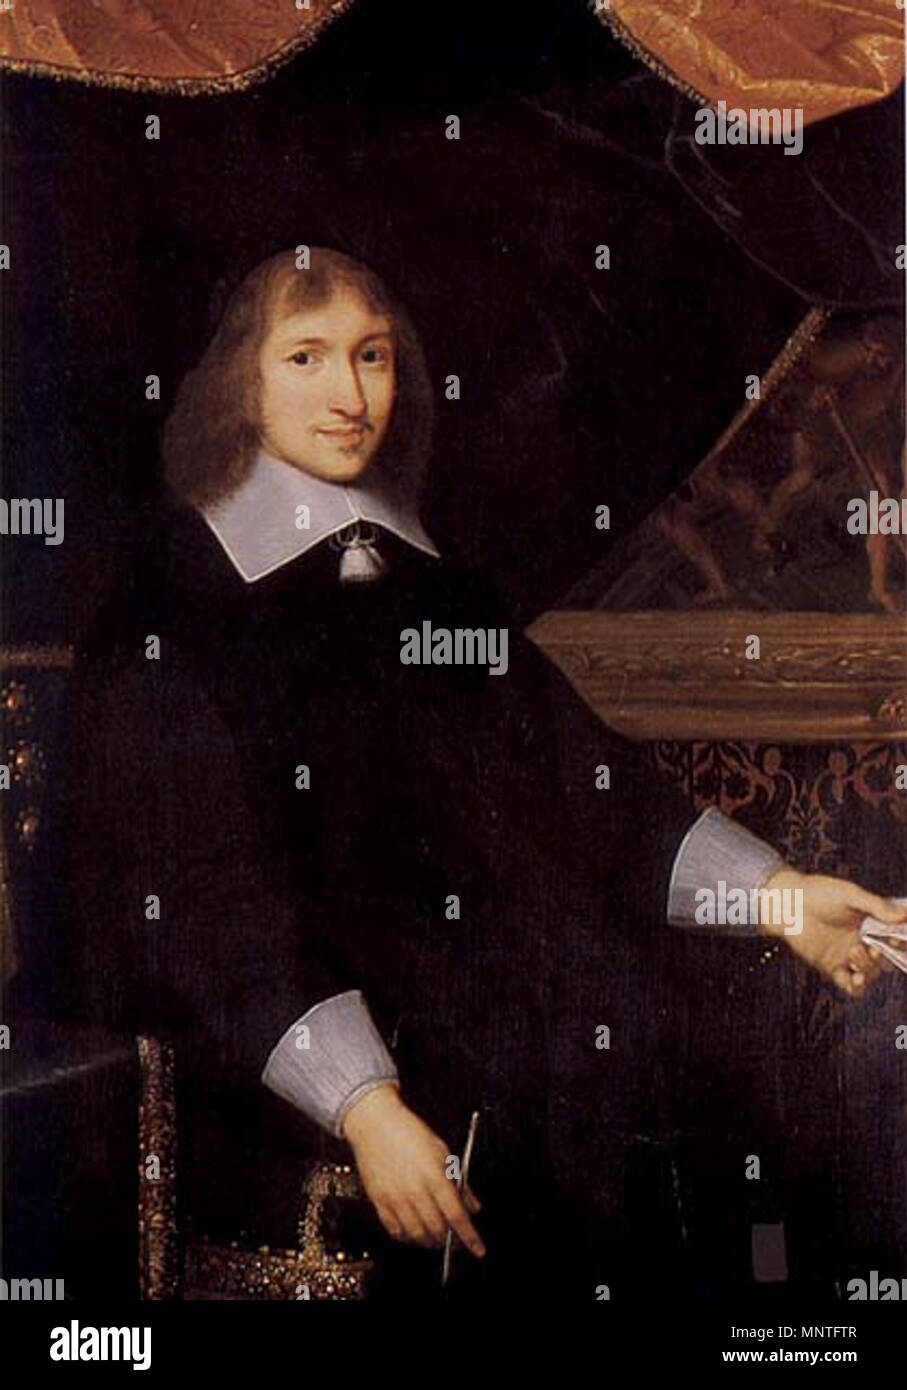 . Portrait of Nicolas Fouquet . 17th century.    Charles Le Brun  (1619–1690)      Alternative names Charles Lebrun  Description French painter and architect  Date of birth/death 24 February 1619 12 February 1690  Location of birth/death Paris Paris  Work location Paris (....-1642), Rome (1642-1646), Paris (1646-....), Versailles (1679-1684, 1886)  Authority control  : Q271676 VIAF: 59097680 ISNI: 0000 0001 2101 6536 ULAN: 500016215 LCCN: n78072045 WGA: LE BRUN, Charles WorldCat    [1] 1016 Portrait Nicolas Fouquet Stock Photo